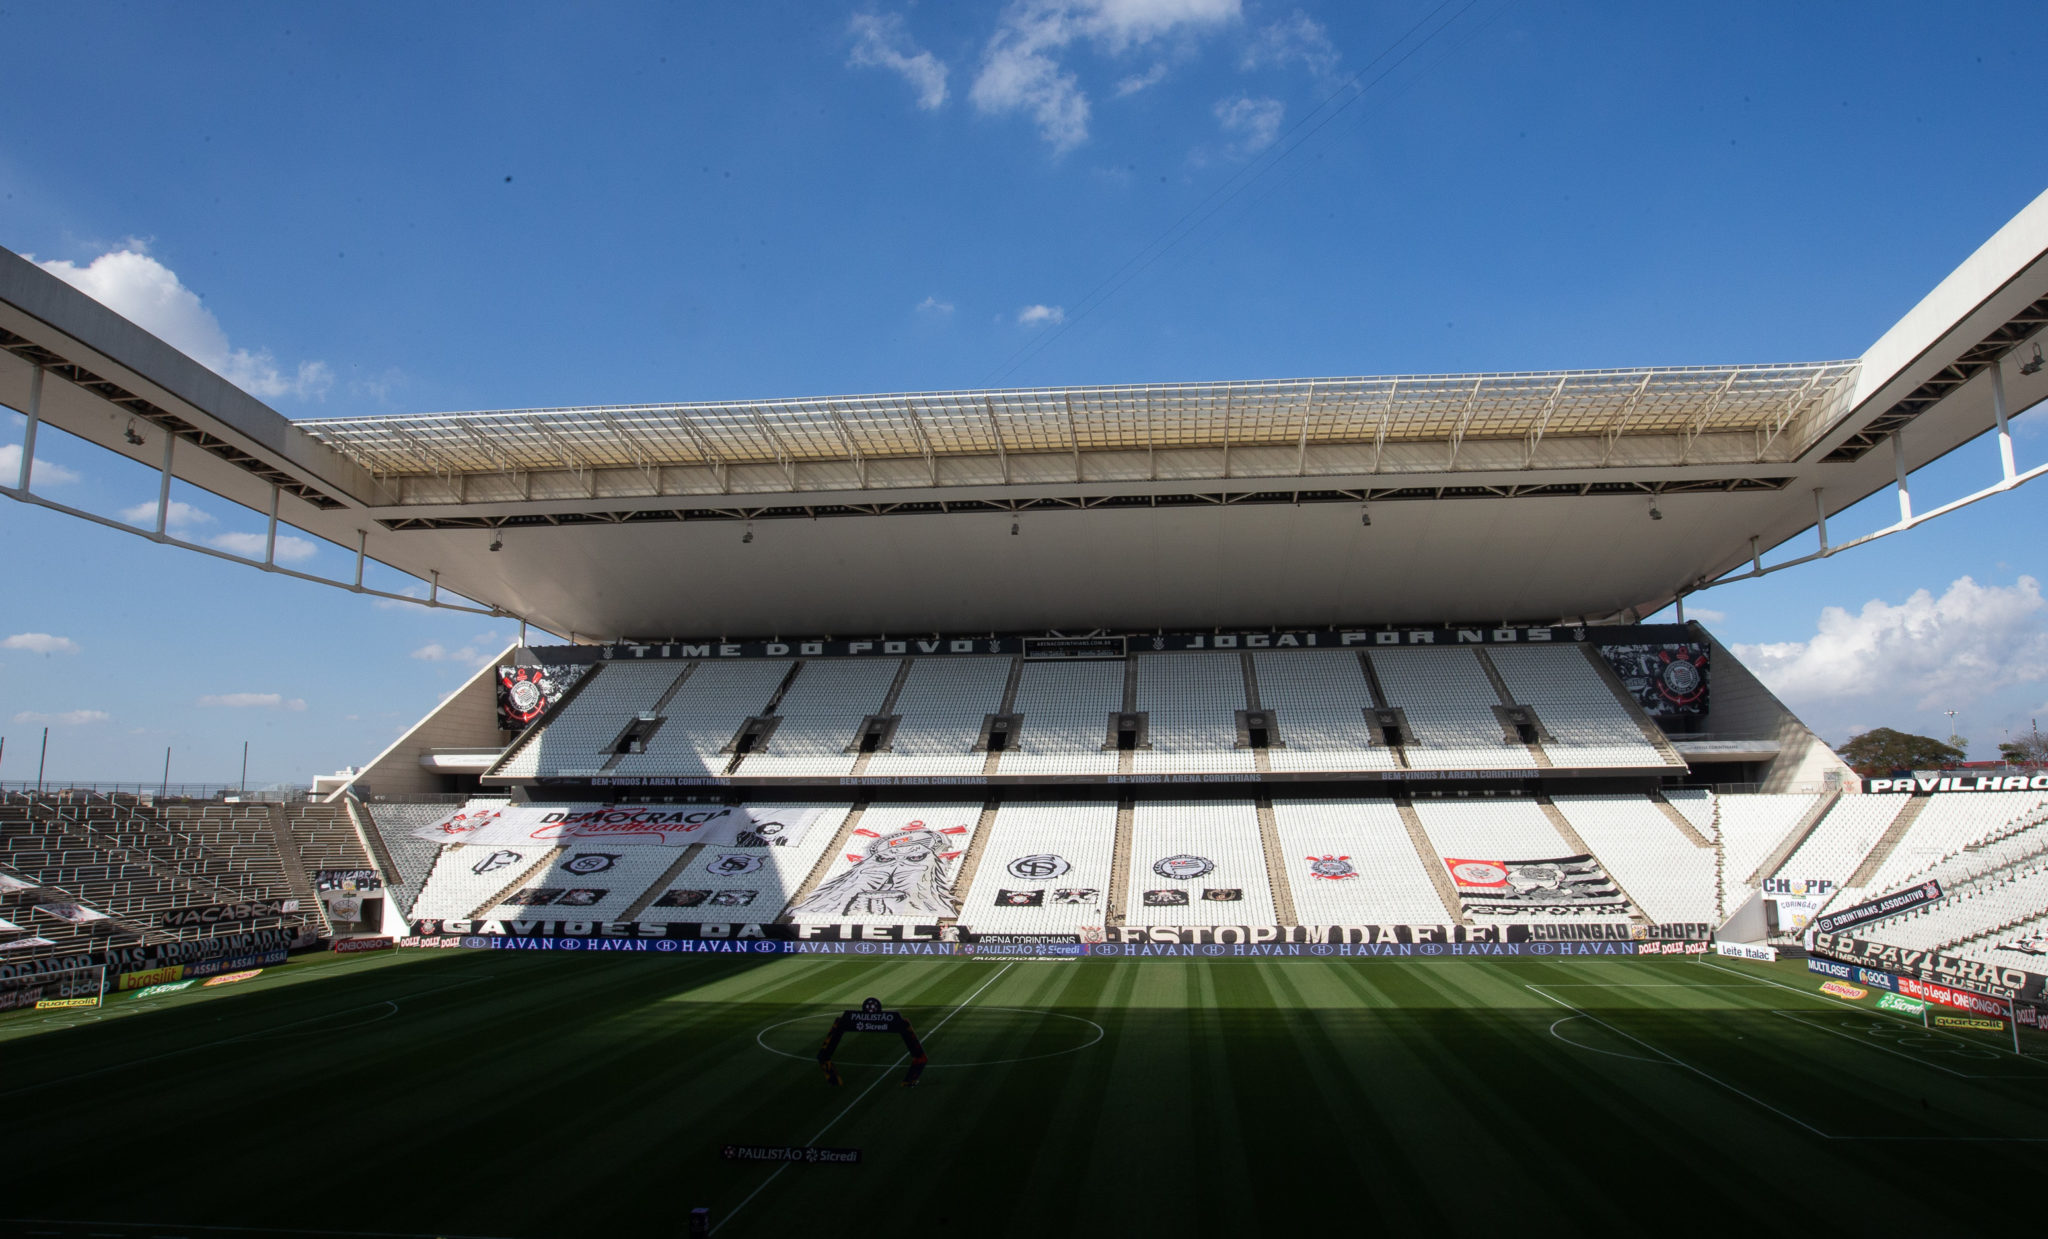 SAO PAULO, BRAZIL - AUGUST 02: A general view of the stadium before the match between Corinthians and Mirassol  as part of the State Championship Semi-Final at Arena Corinthians on August 2, 2020 in Sao Paulo, Brazil. The match is played behind closed doors and with precautionary measures against the spread of coronavirus (COVID-19).   (Photo by Alexandre Schneider/Getty Images)